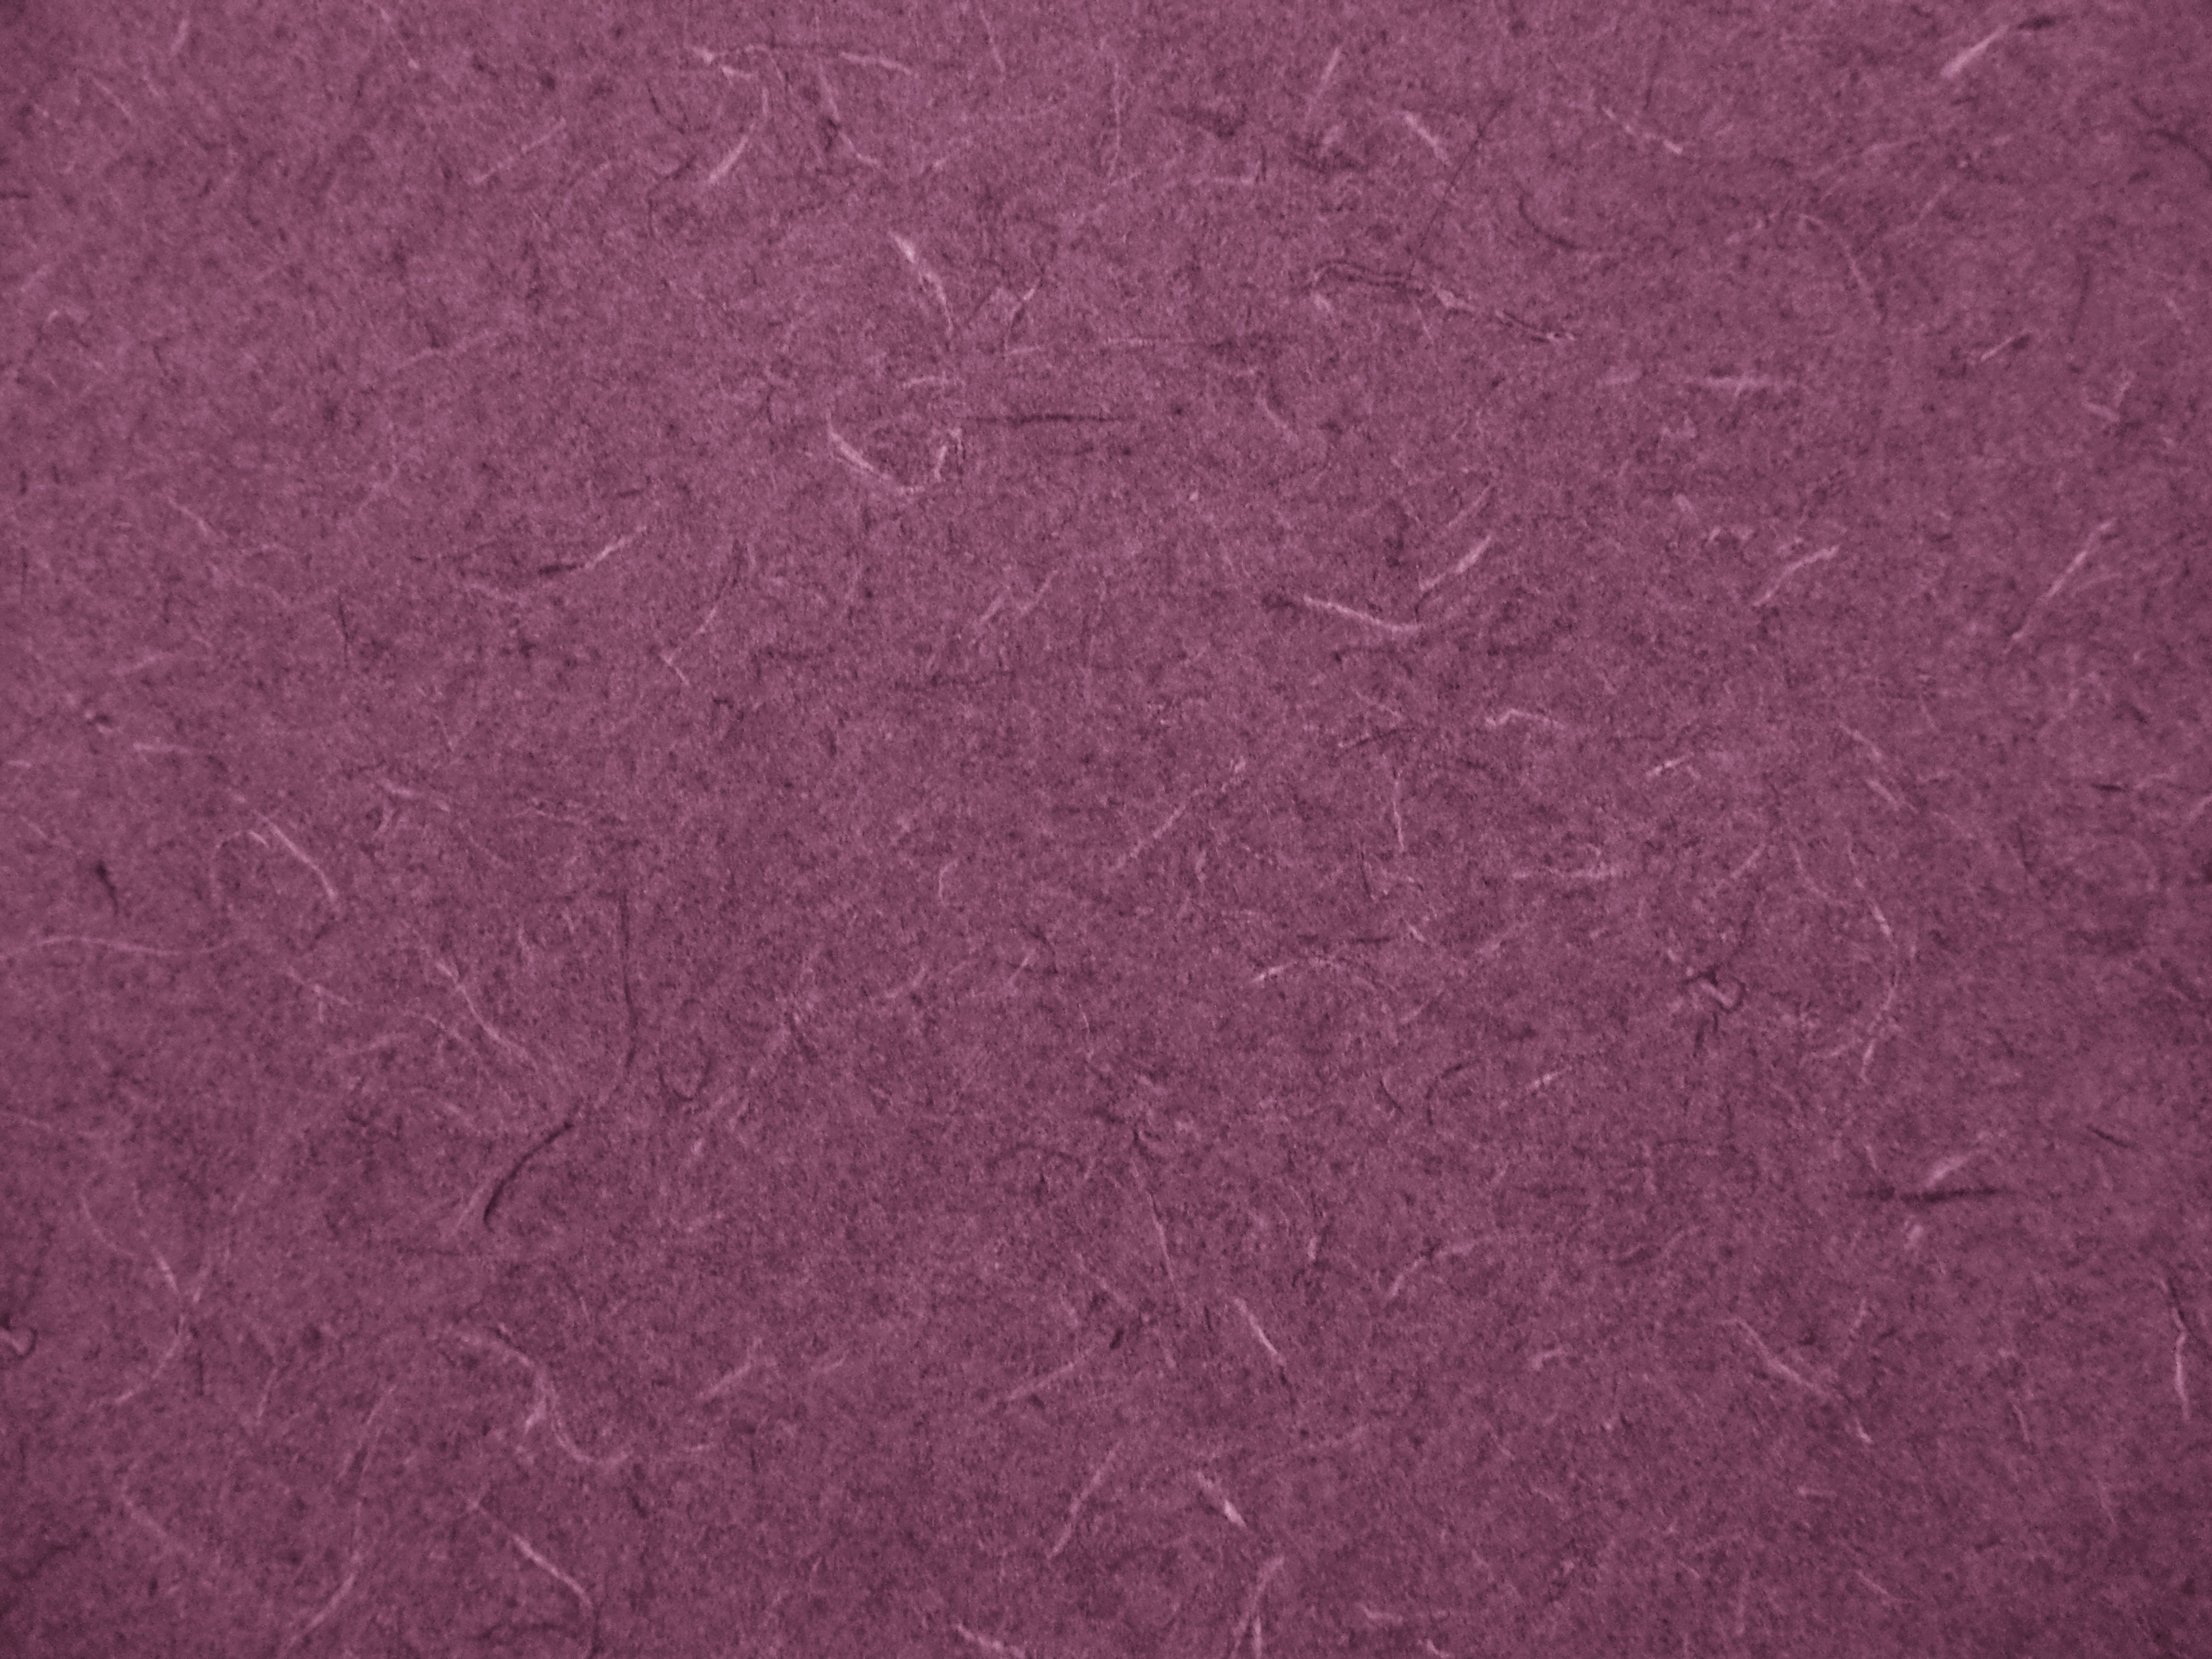 Dusty Rose Abstract Pattern Laminate Countertop Texture Picture